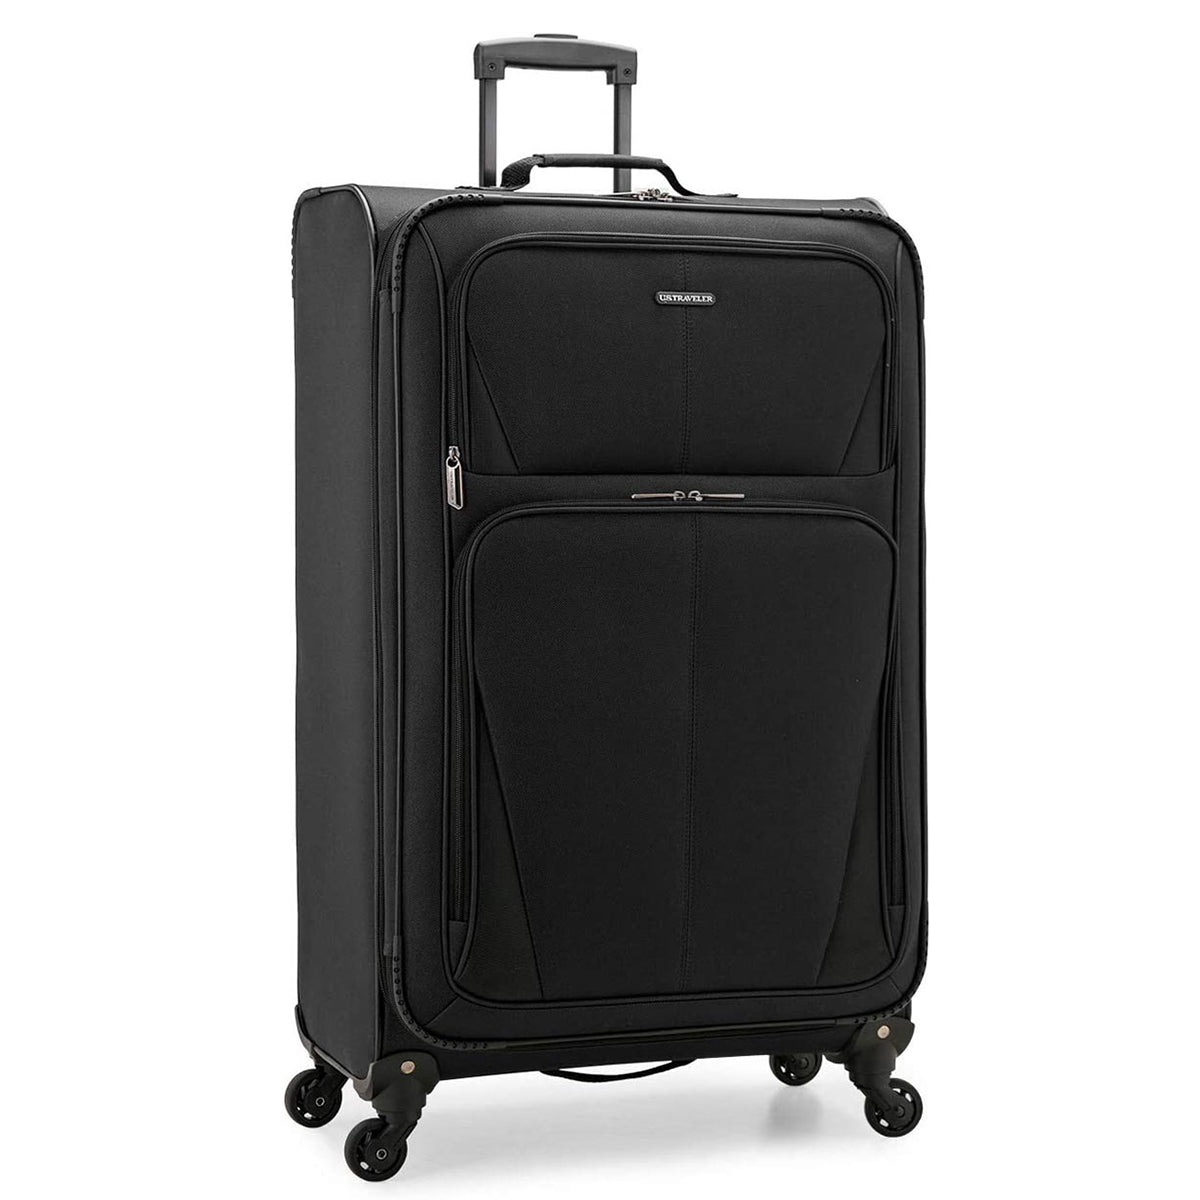 U.S. Traveler Aviron Bay Expandable Softside Luggage with Spinner Wheels, Checked 30-Inch